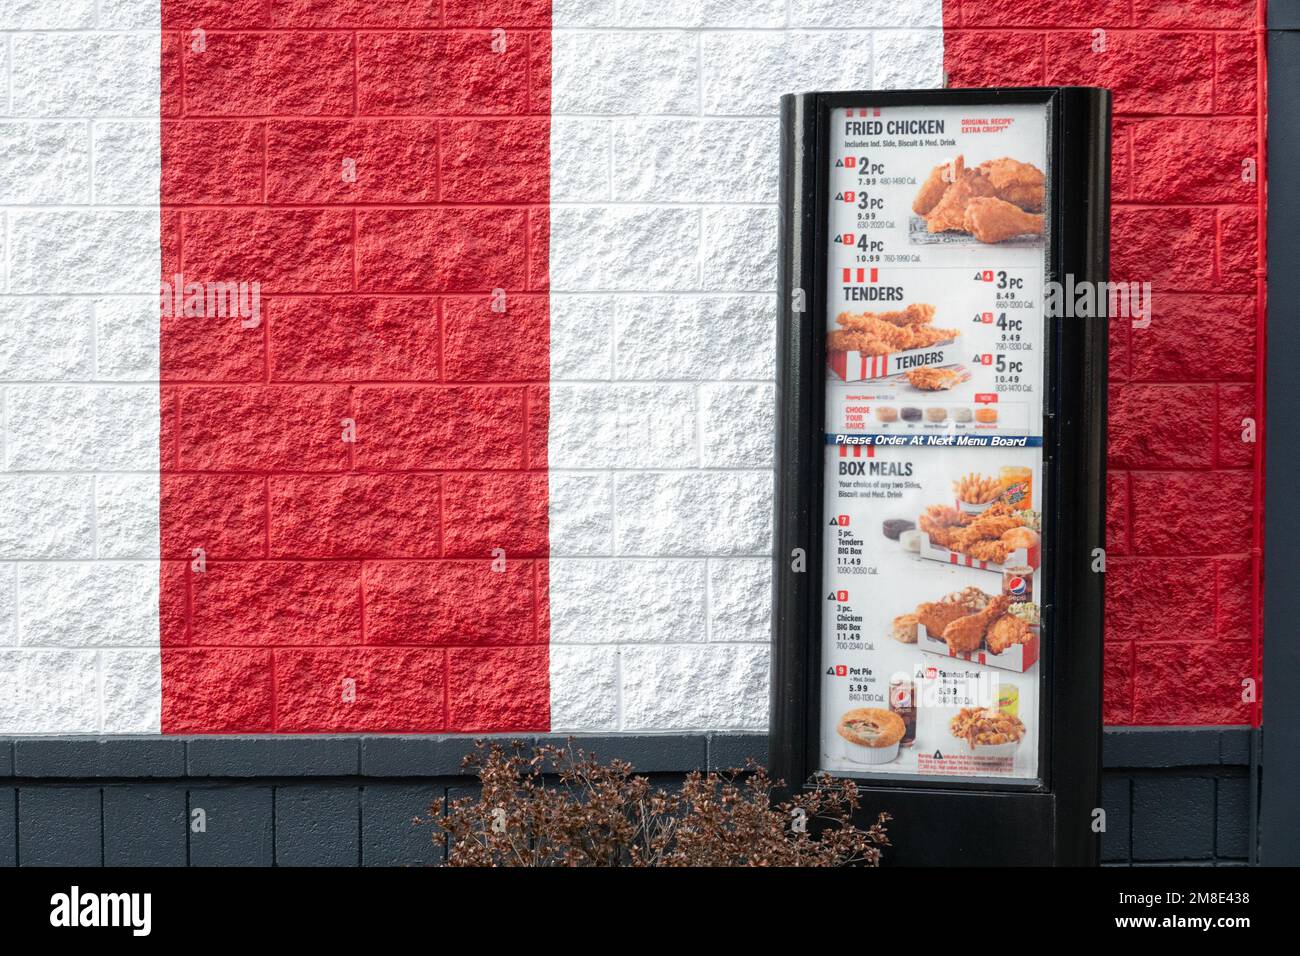 The drive through menu at a KFC, Kentucky Fried Chicken, restaurant on Northern Blvd in Flushing, Queens, New York City. Stock Photo